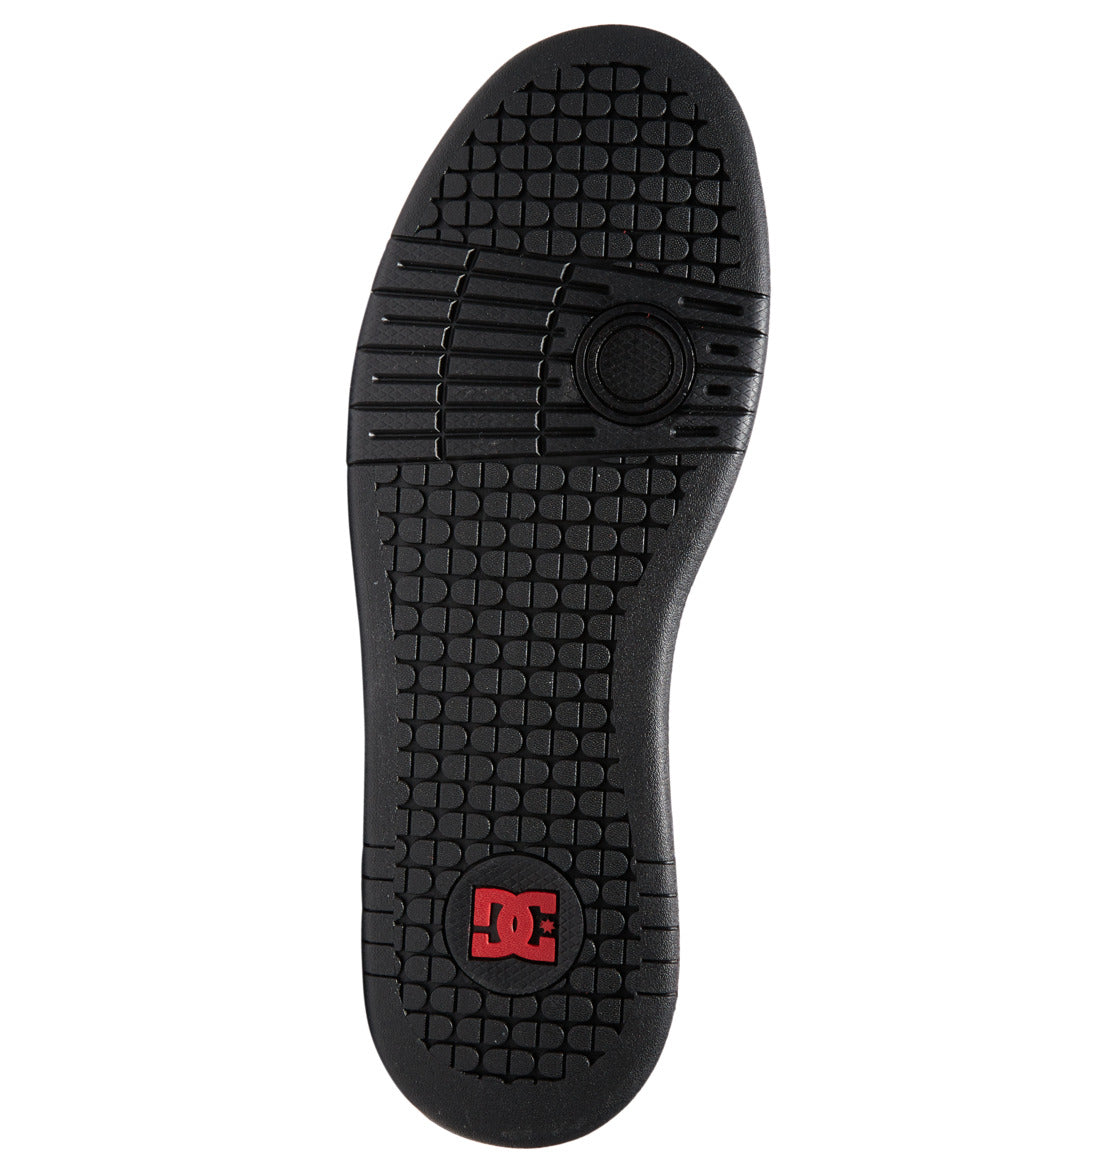 DC SHOES MANTECA 4 RED BLACK & WHITE TRAINERS